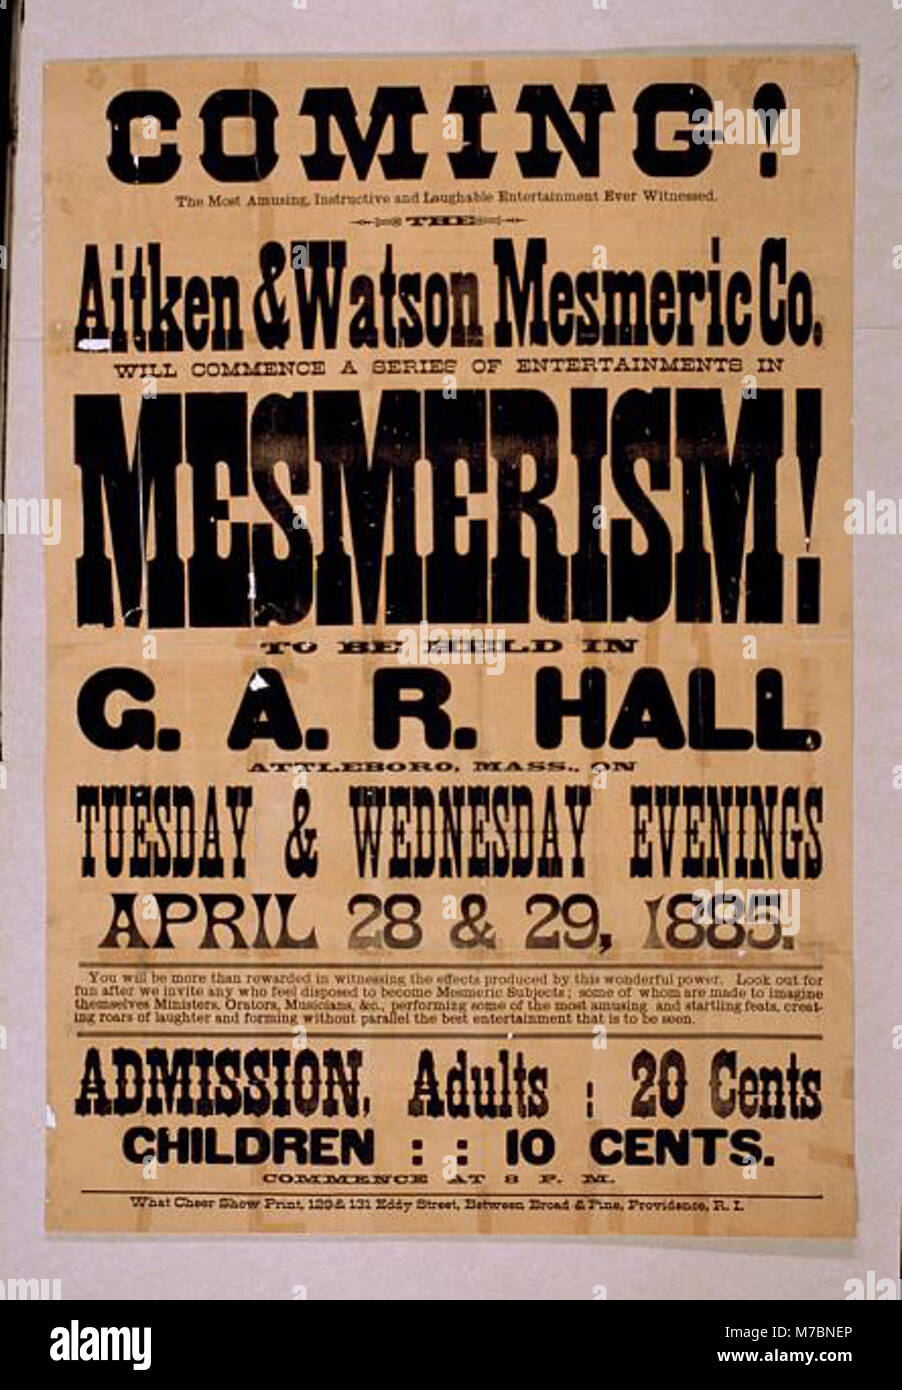 Coming! Aitken & Watson Mesmeric Co. will commence a series of entertainments in mesmerism! to be held in G.A.R. Hall, Attleboro, Mass. on Tuesday & Wednesday evenings, April 28 & 29, 1885. LCCN2014636875 Stock Photo